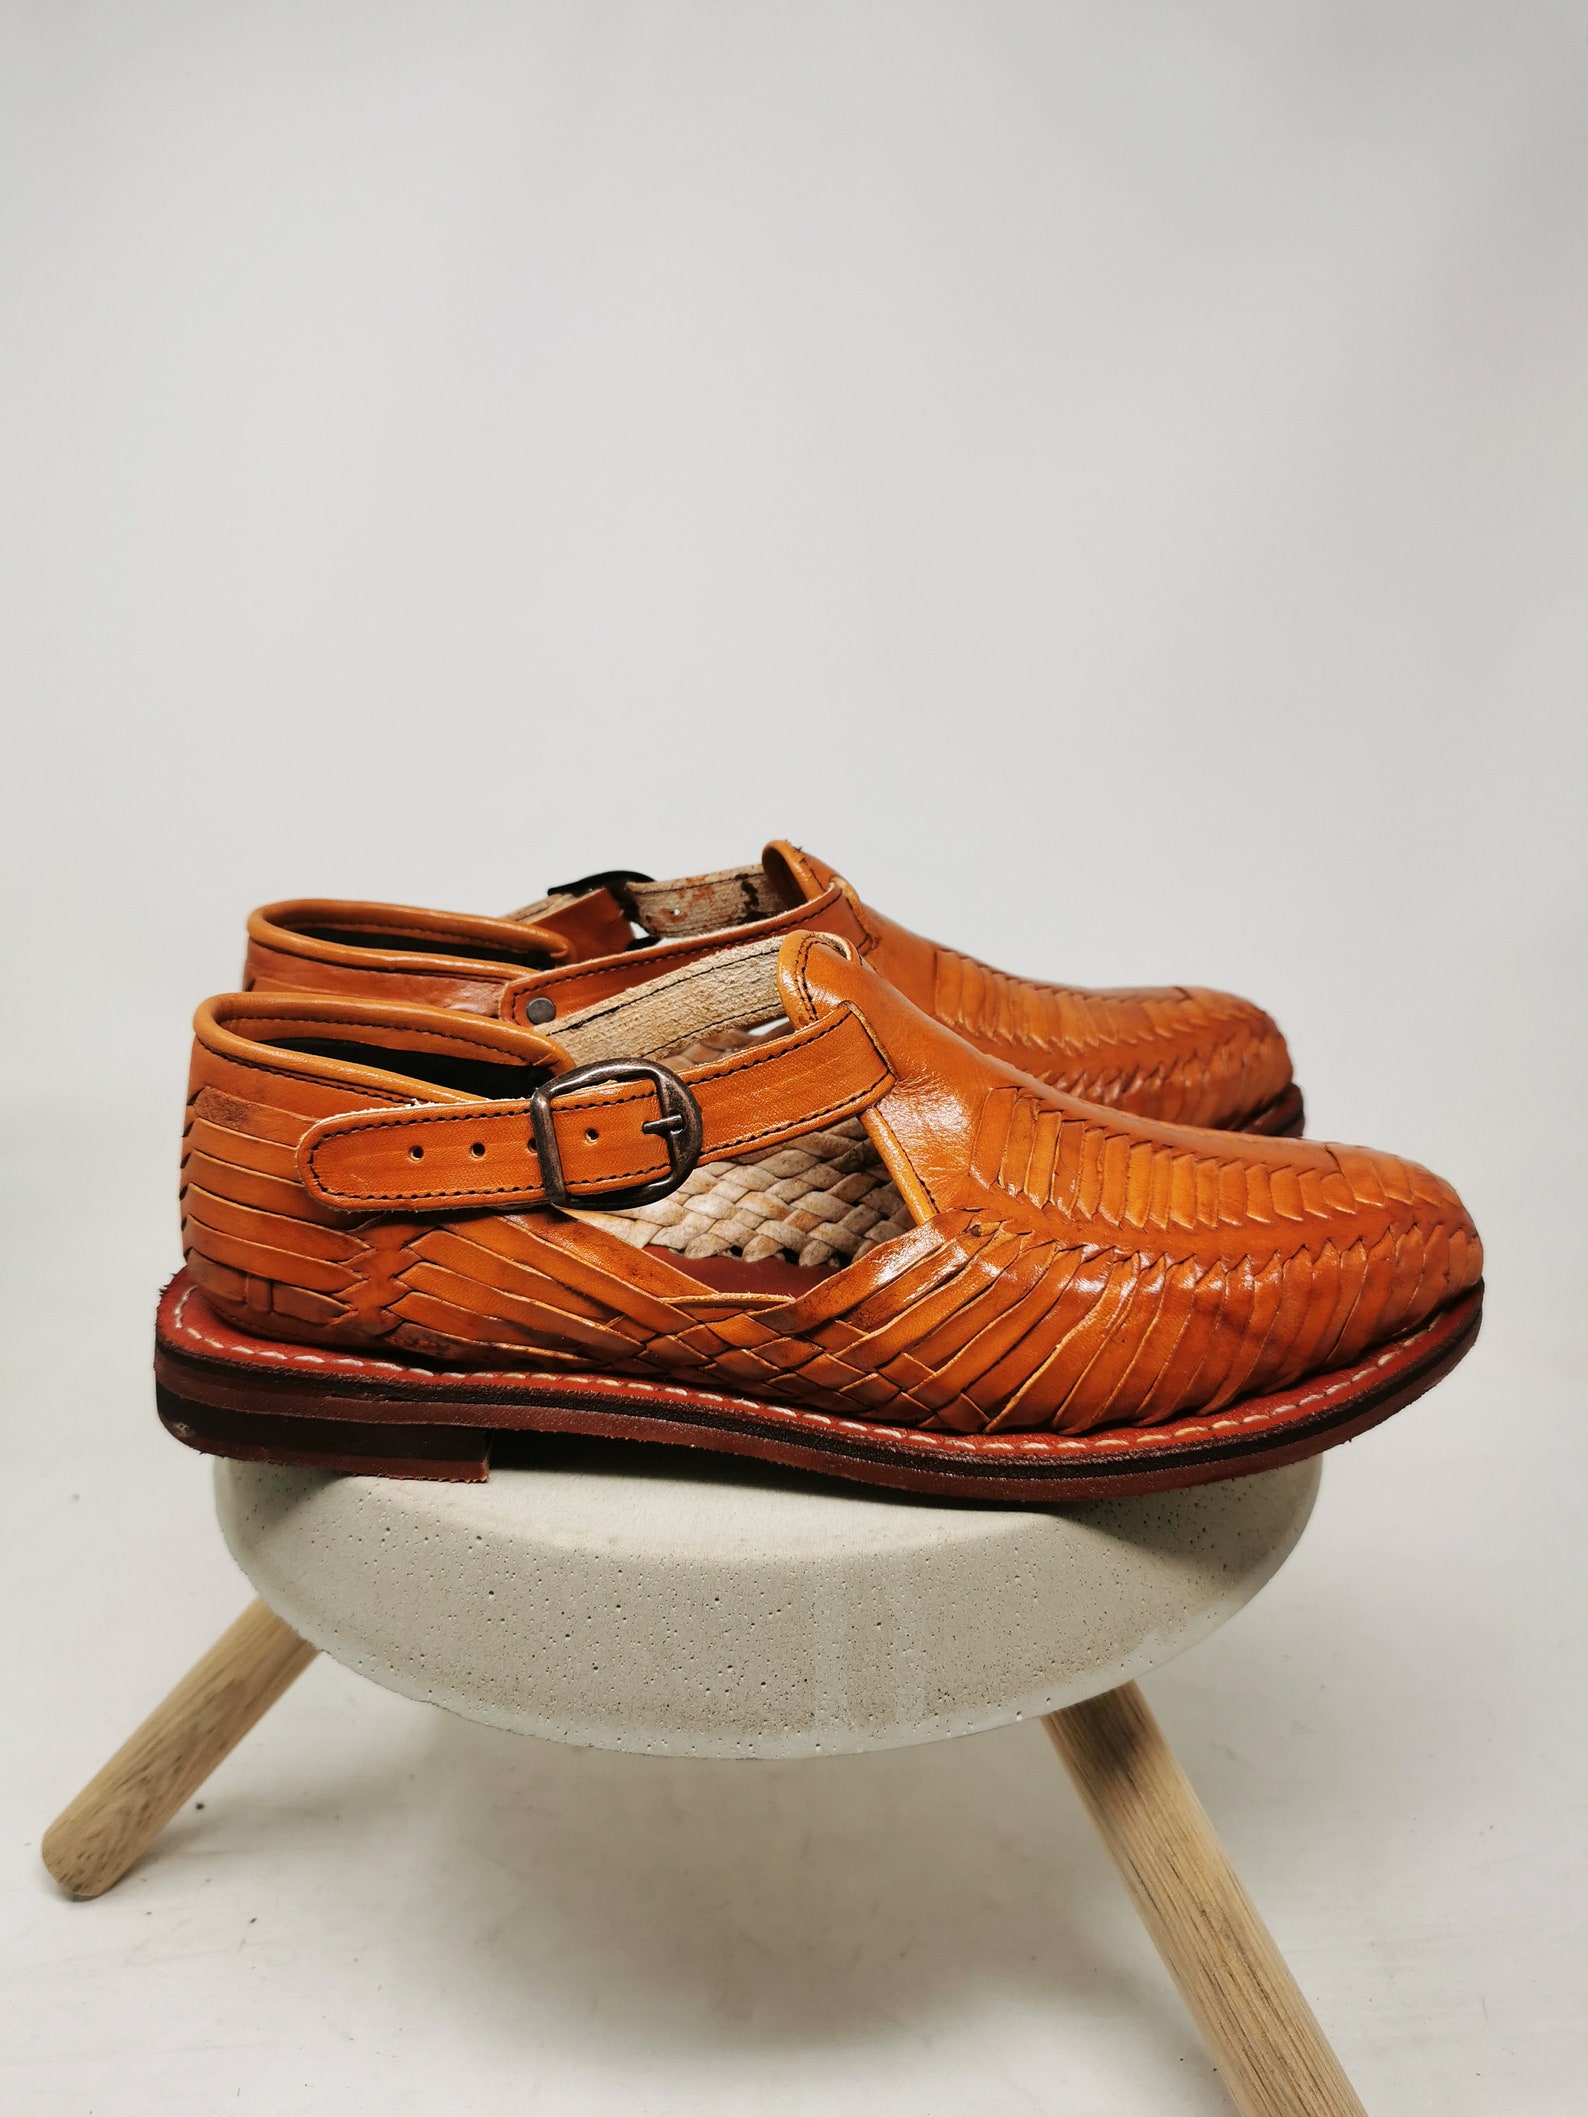 Mens Huaraches With Strap Closed Toe Sandals. Made in Mexico - Etsy